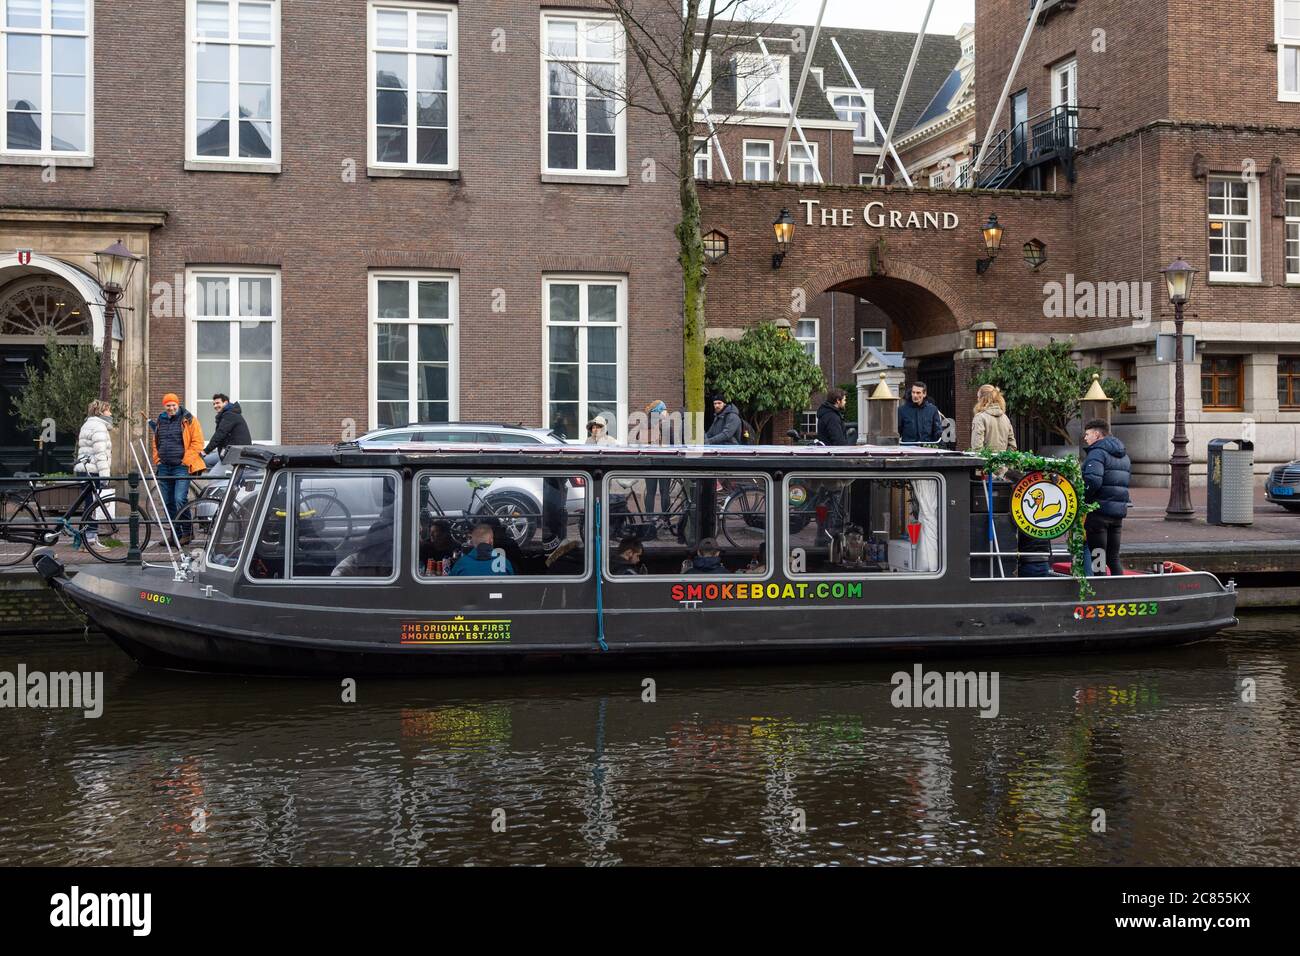 Amsterdam, Netherlands - January 15 2019: Passengers enjoy smoking cannabis on the Smoke Boat in the De Wallen Red Light District of Amsterdam. Stock Photo